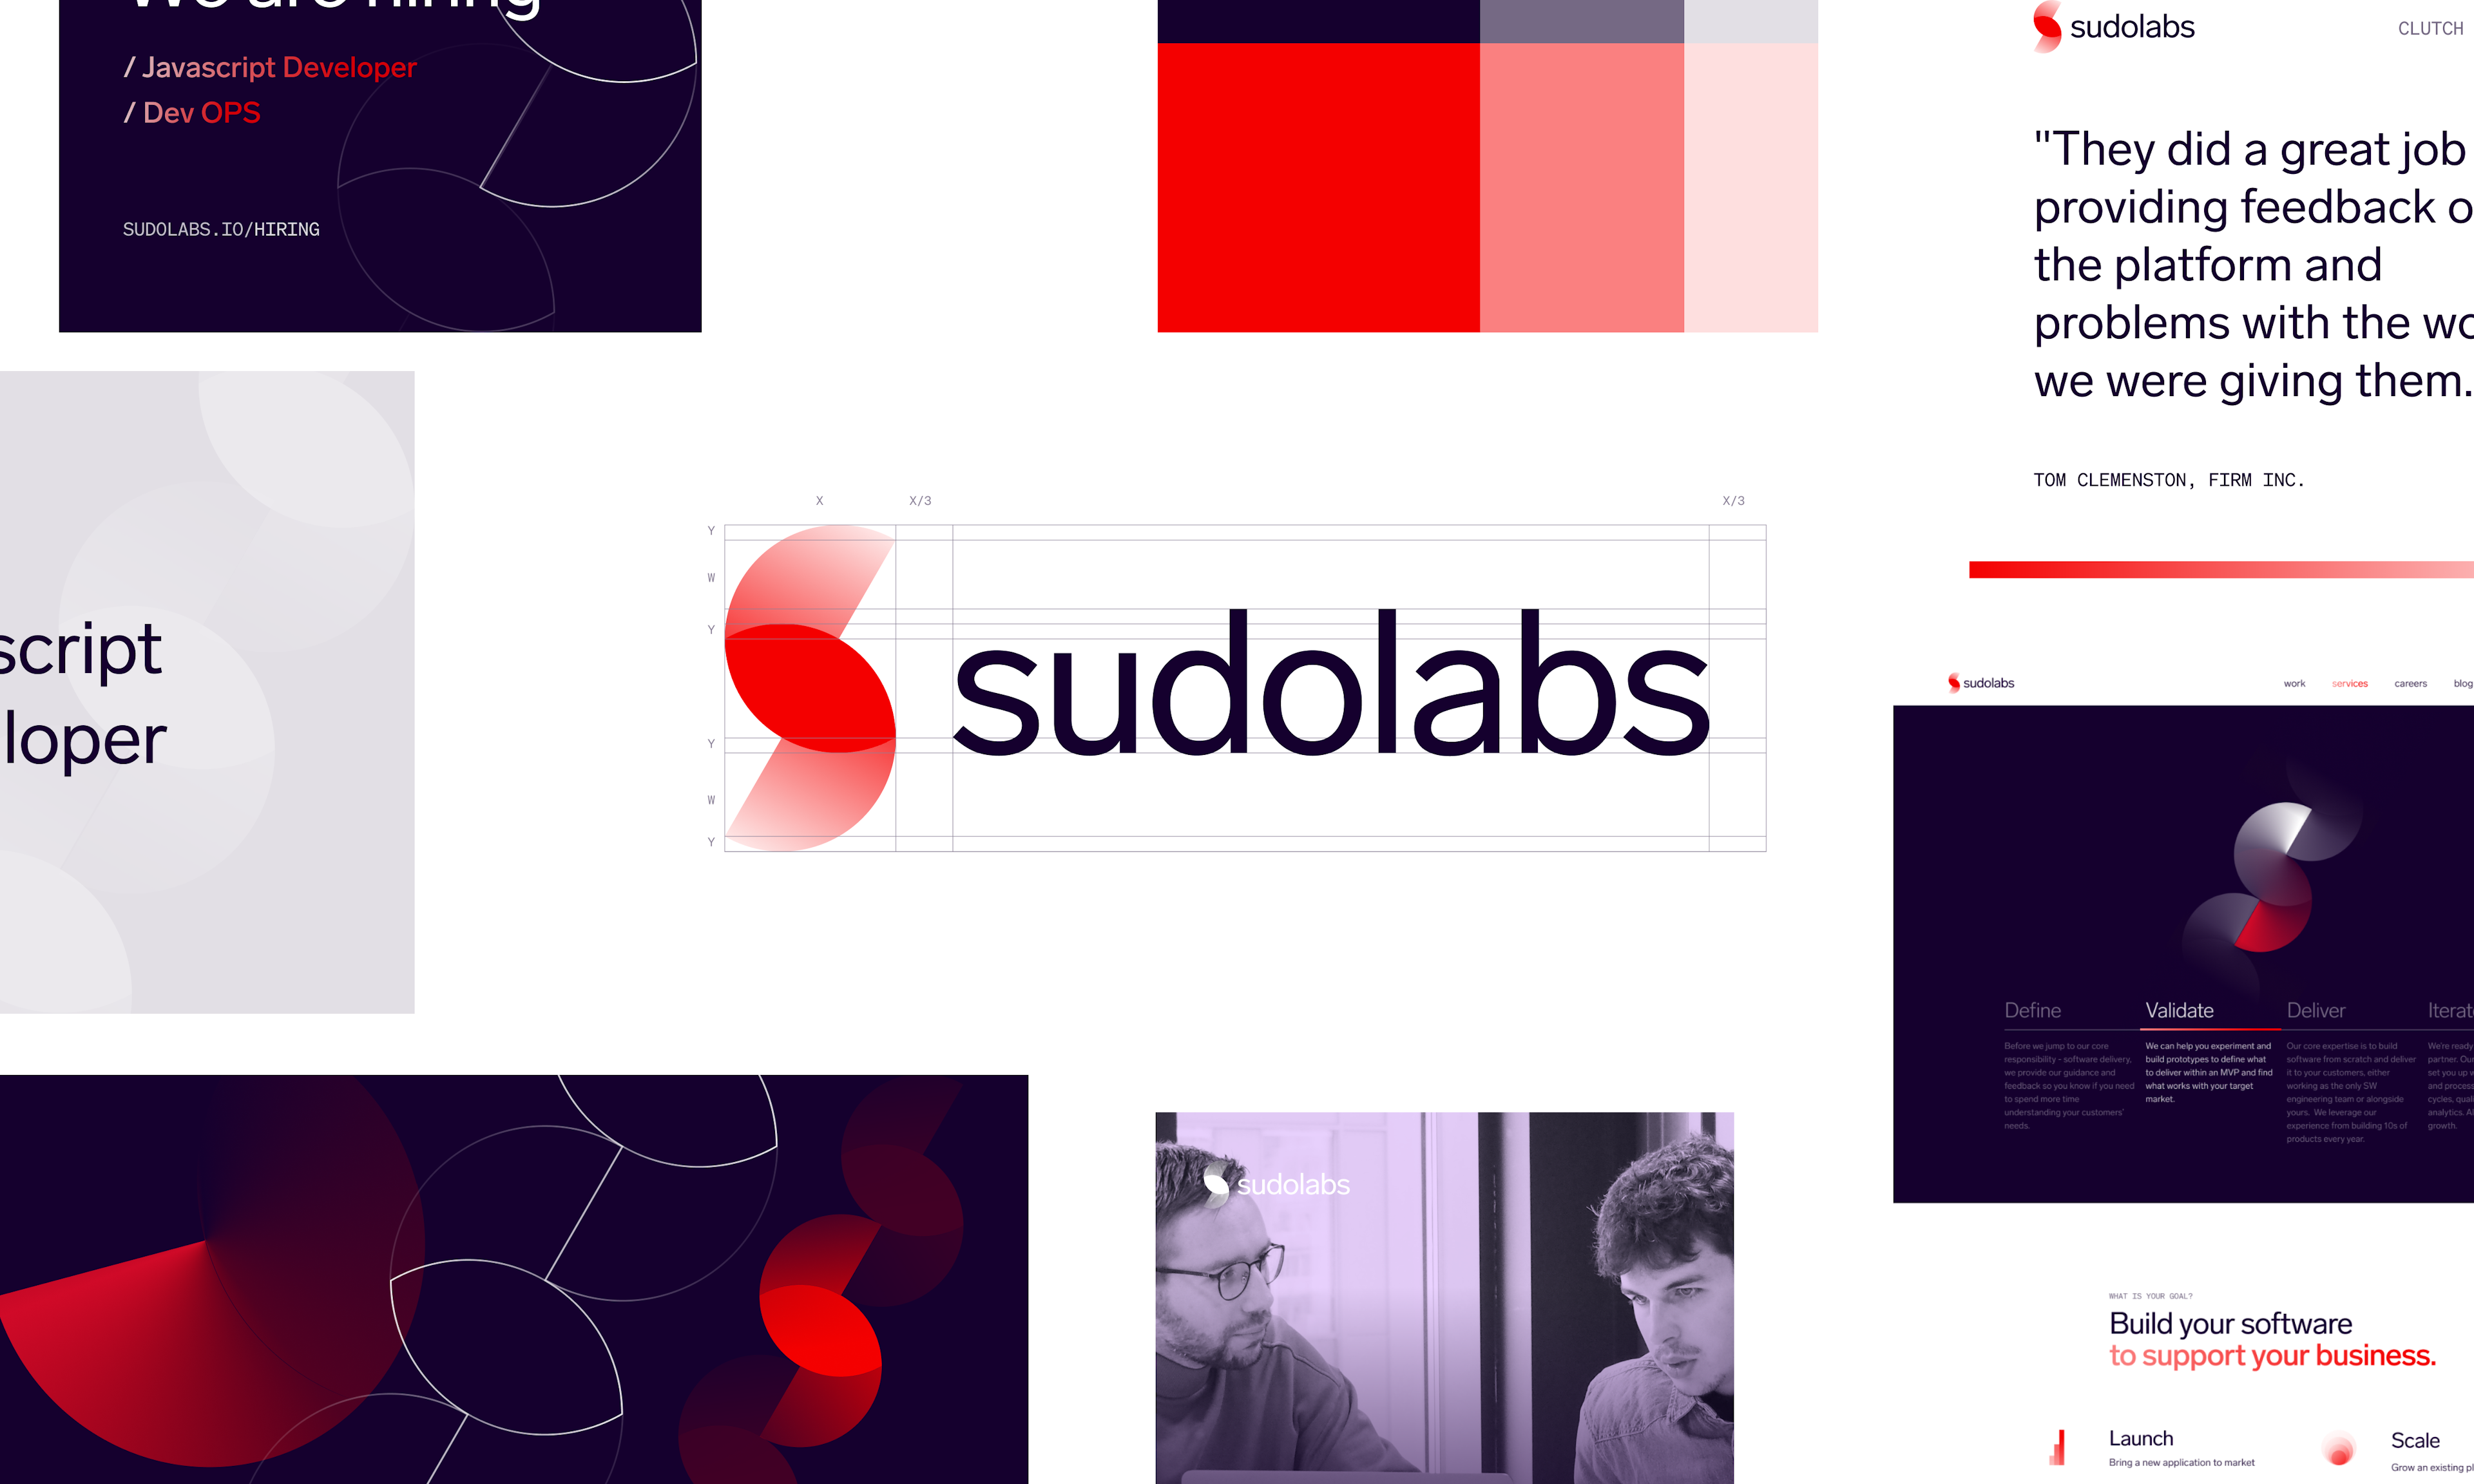 Sudolabs Brand 2.0: Every rebranding needs a strong reason from inside